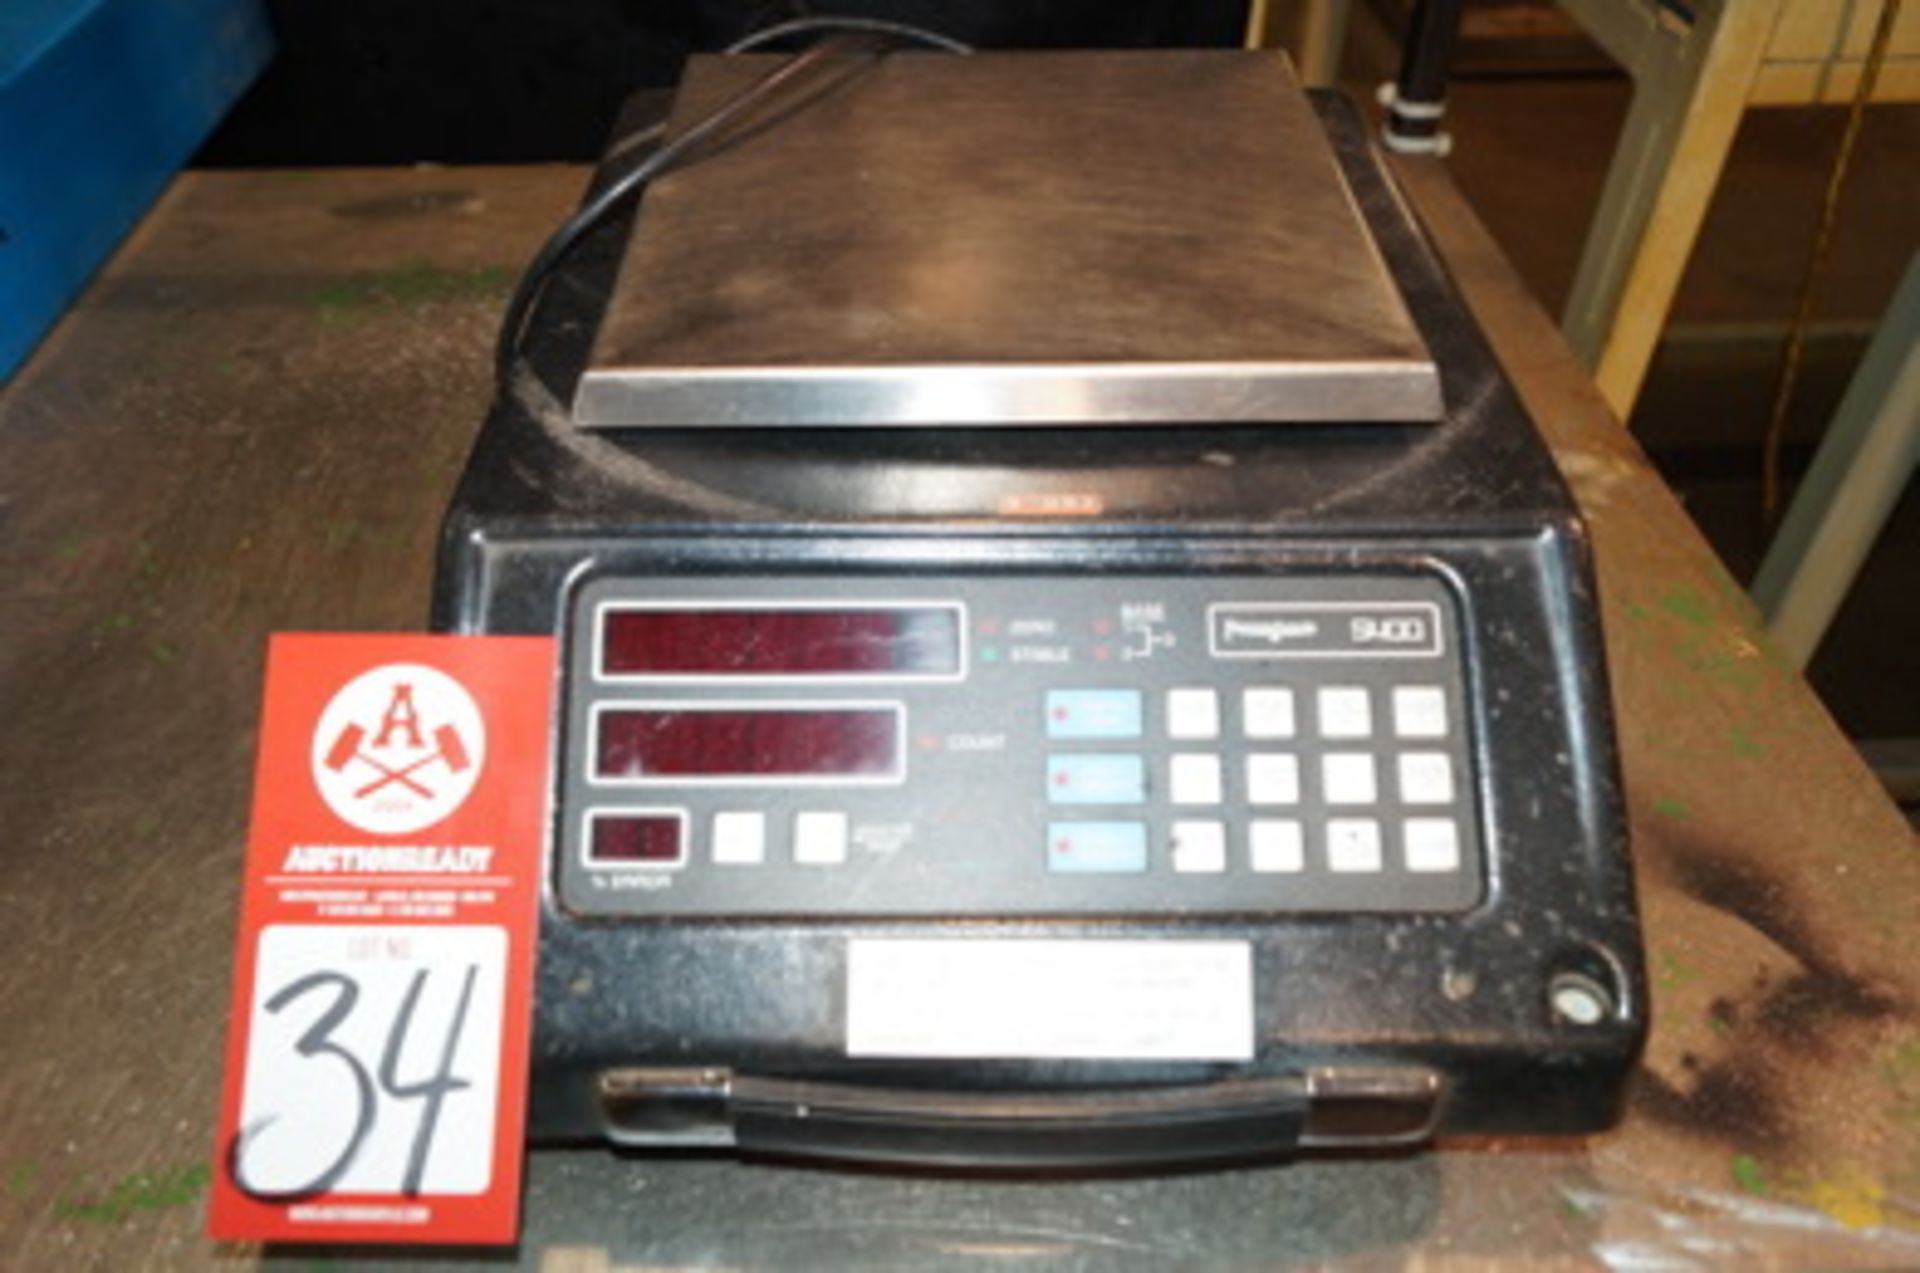 Pennslyvania S400 Table Scale w/ Digital Read out